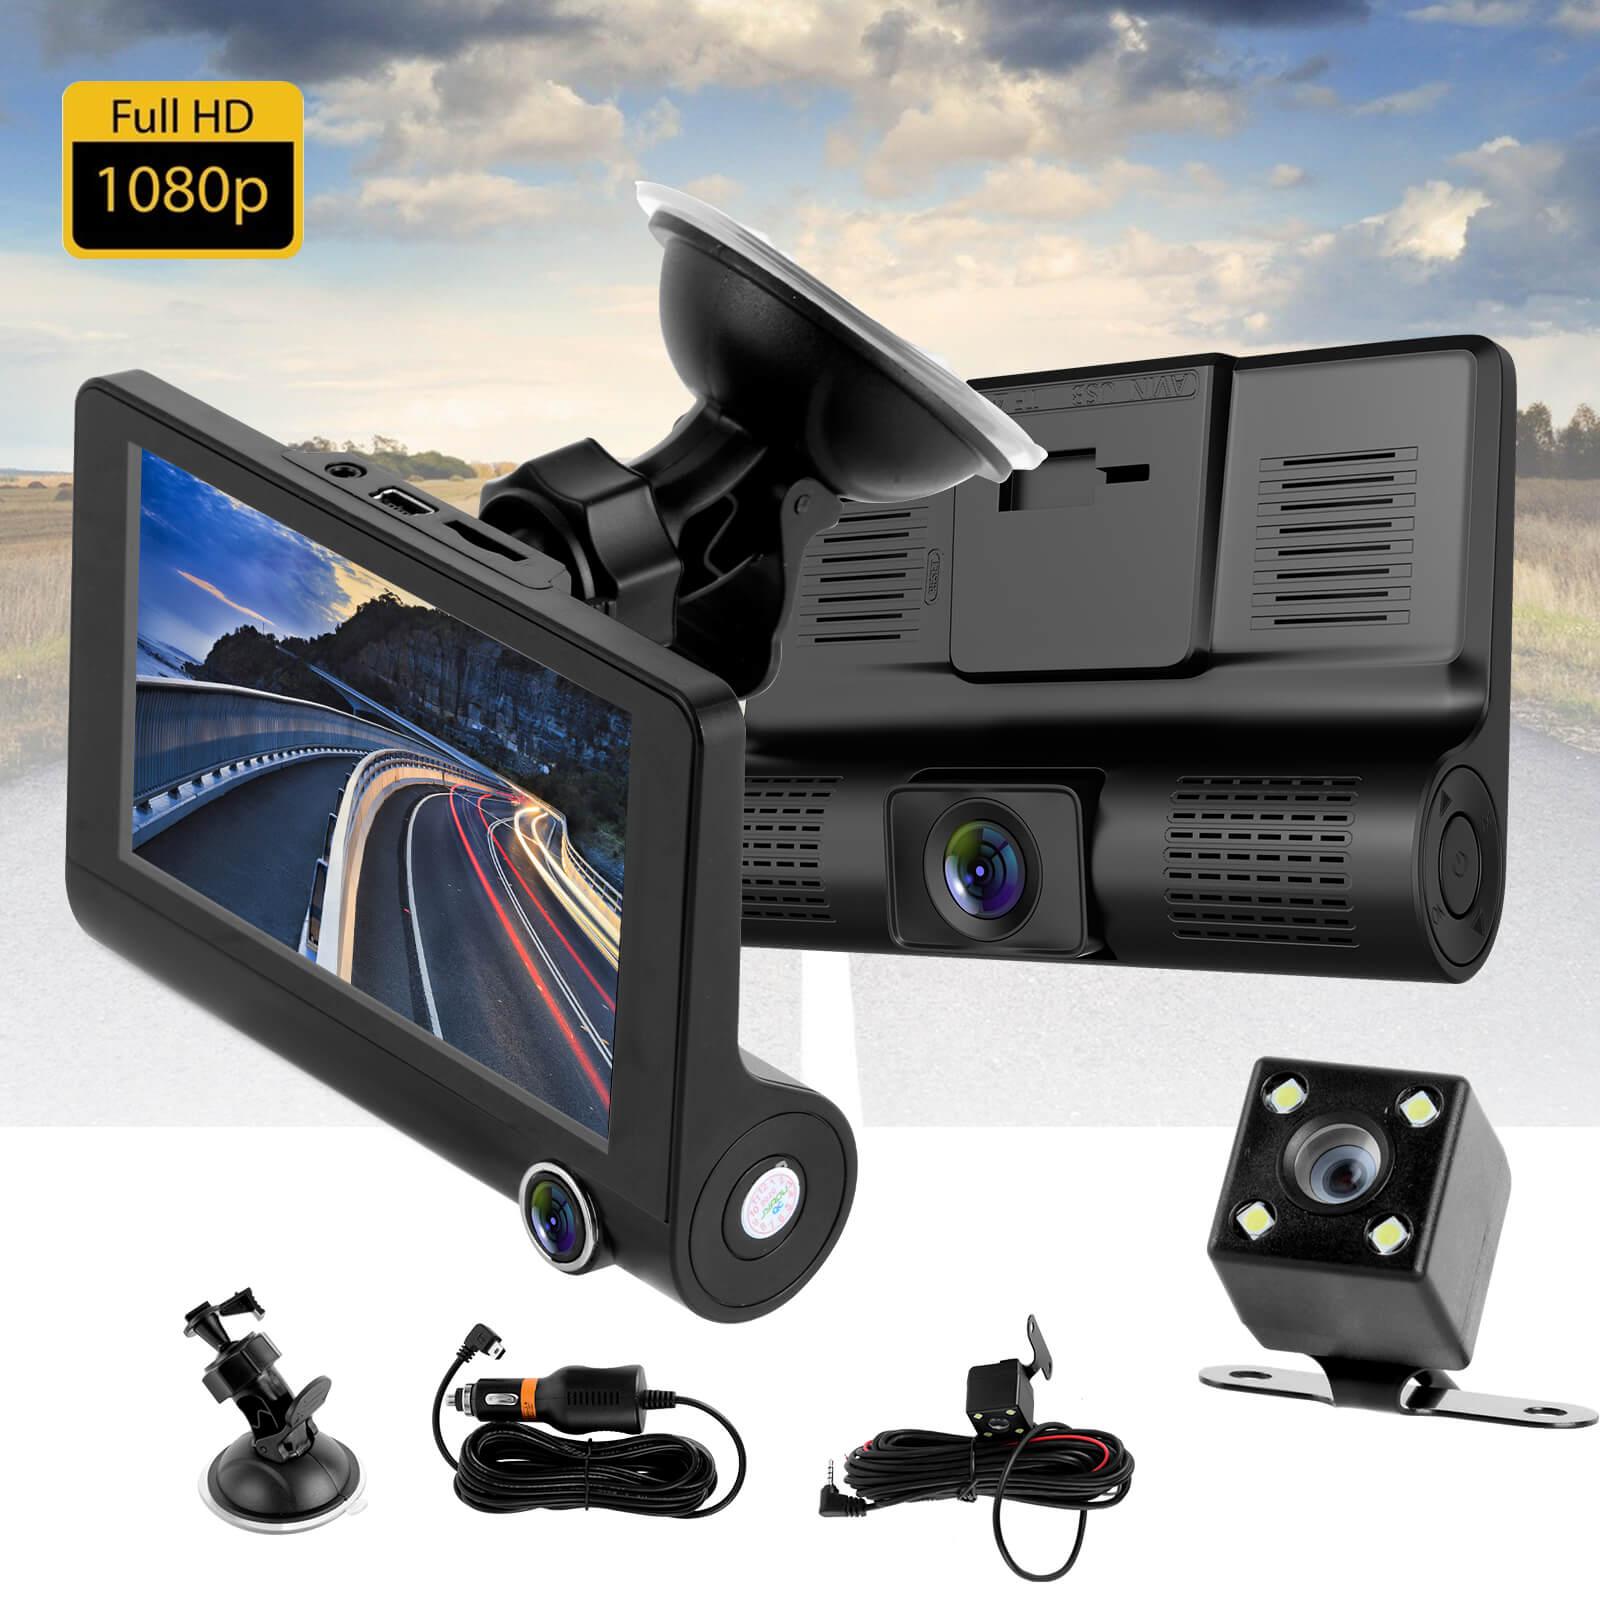 XGODY C2 4-inch 1080P 3 Lens Car Dash Cam with Video Recorder